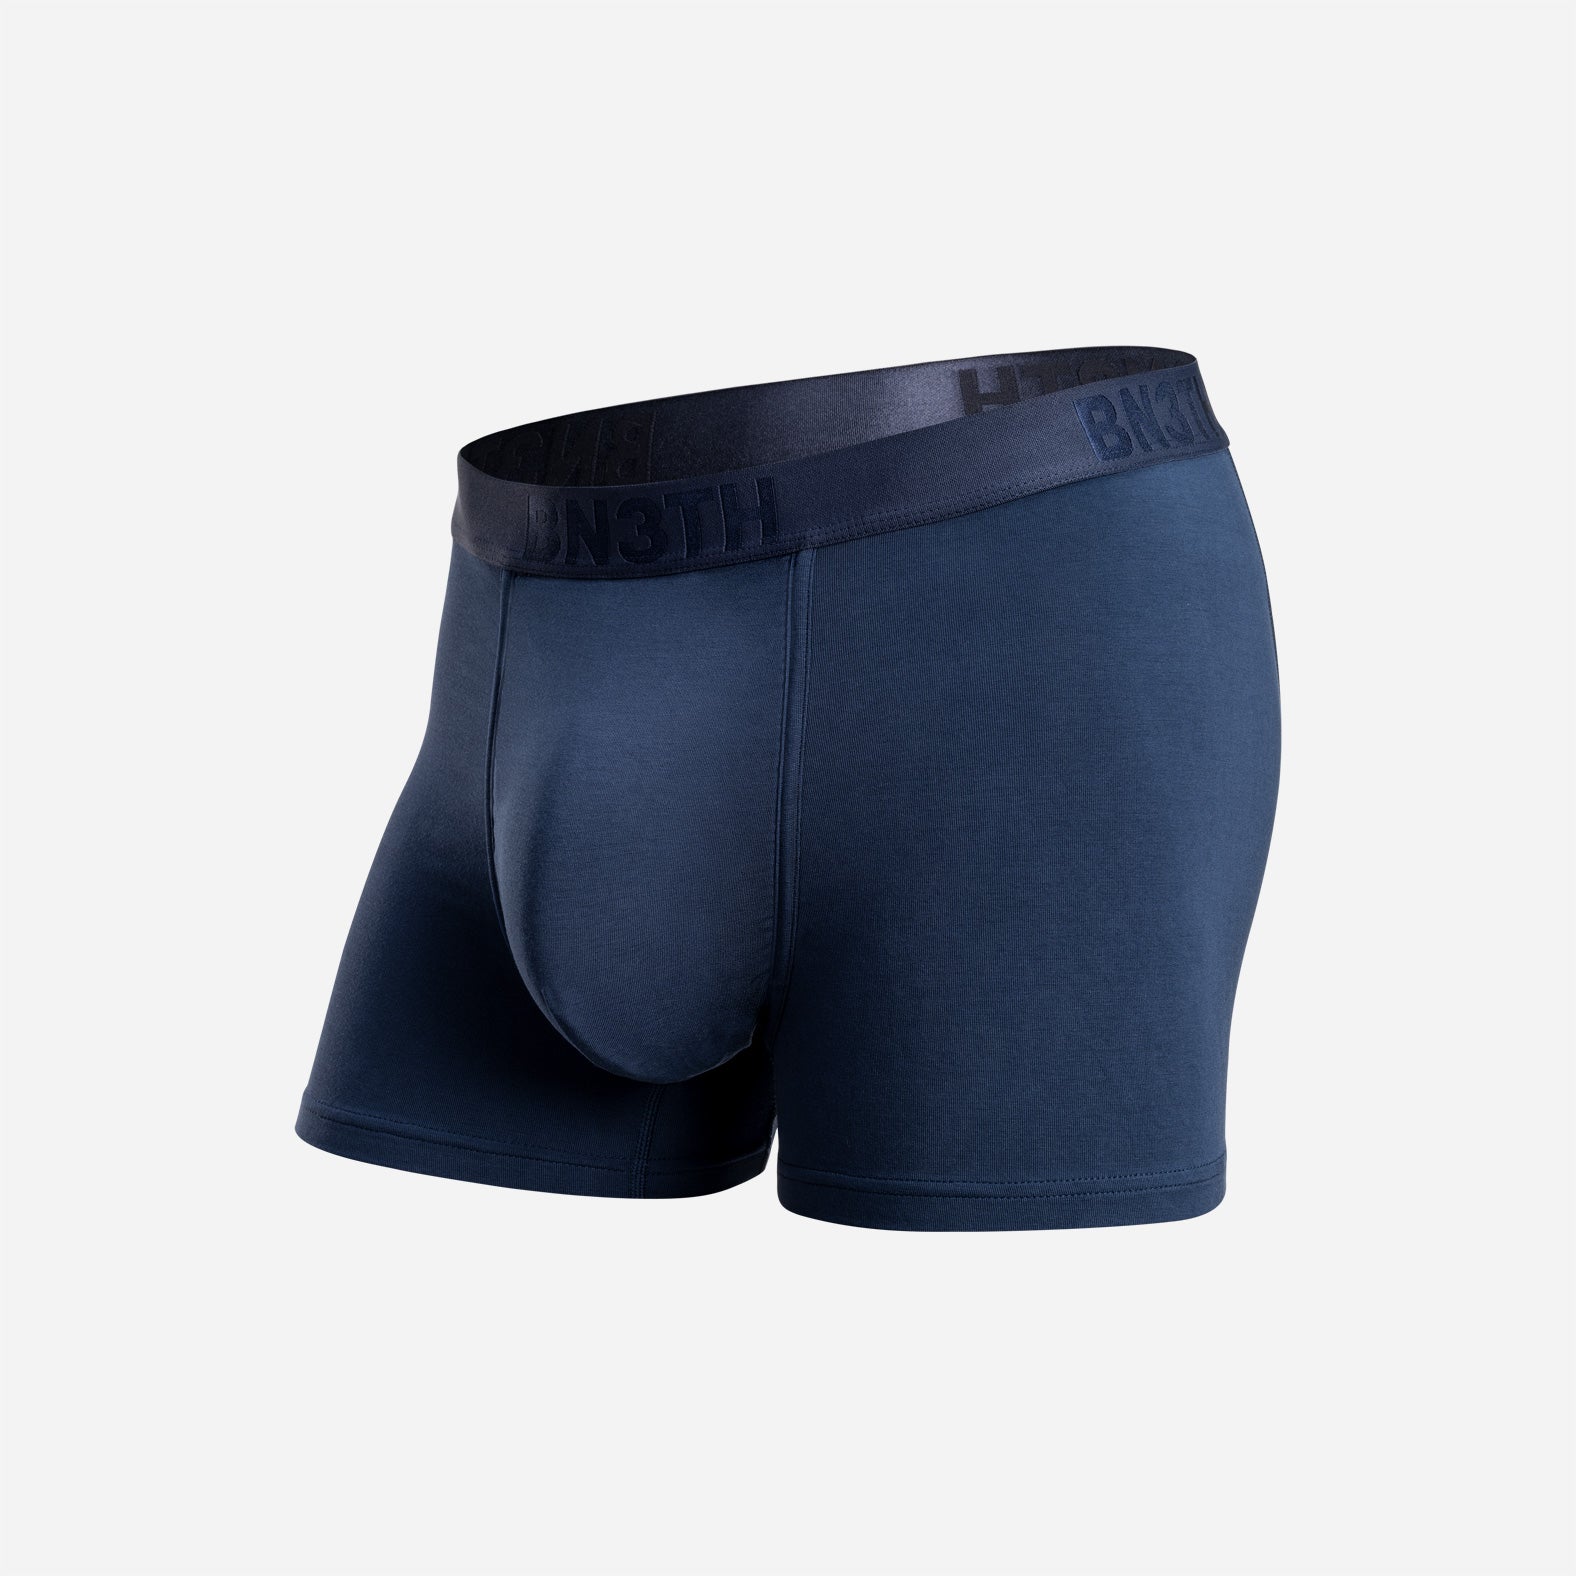 CLASSIC TRUNK WITH FLY: NAVY